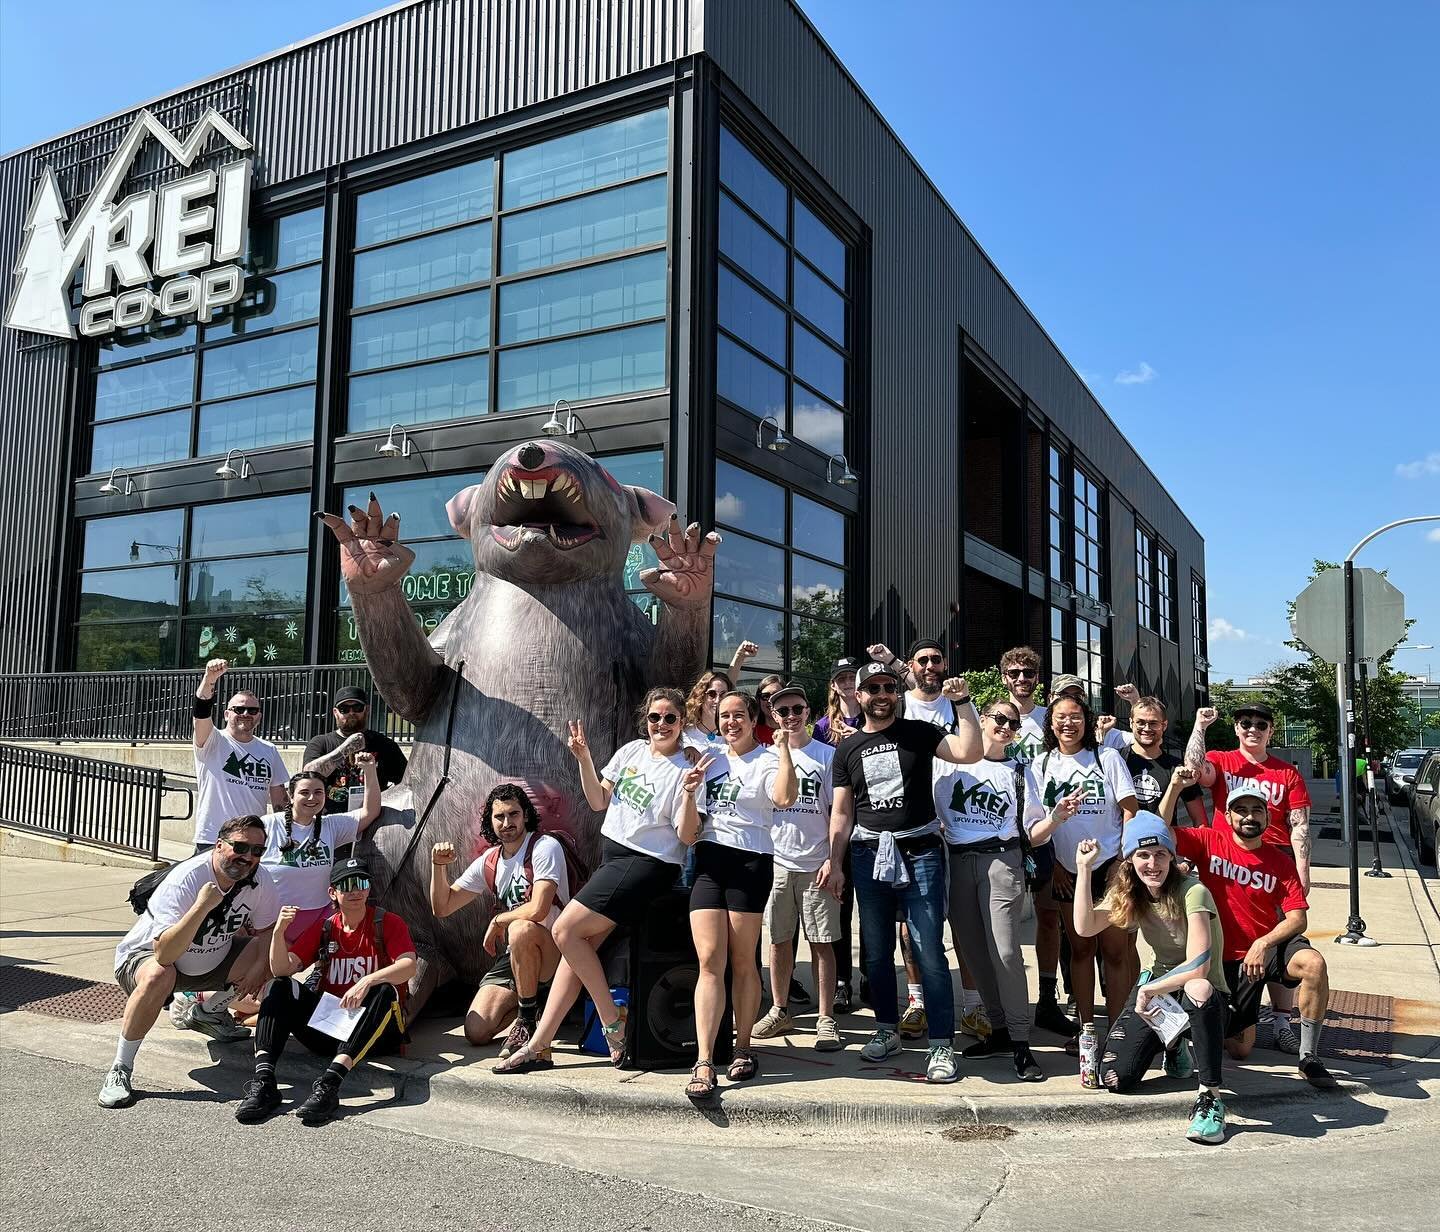 🚨🚨🚨STRIKE🚨🚨🚨@reiunionchicago is on #Strike @REI in protest of their failure to bargain in good faith! In 30min we&rsquo;ll be starting our rally with our #union siblings across the @chicagolabor #faircontractNOW